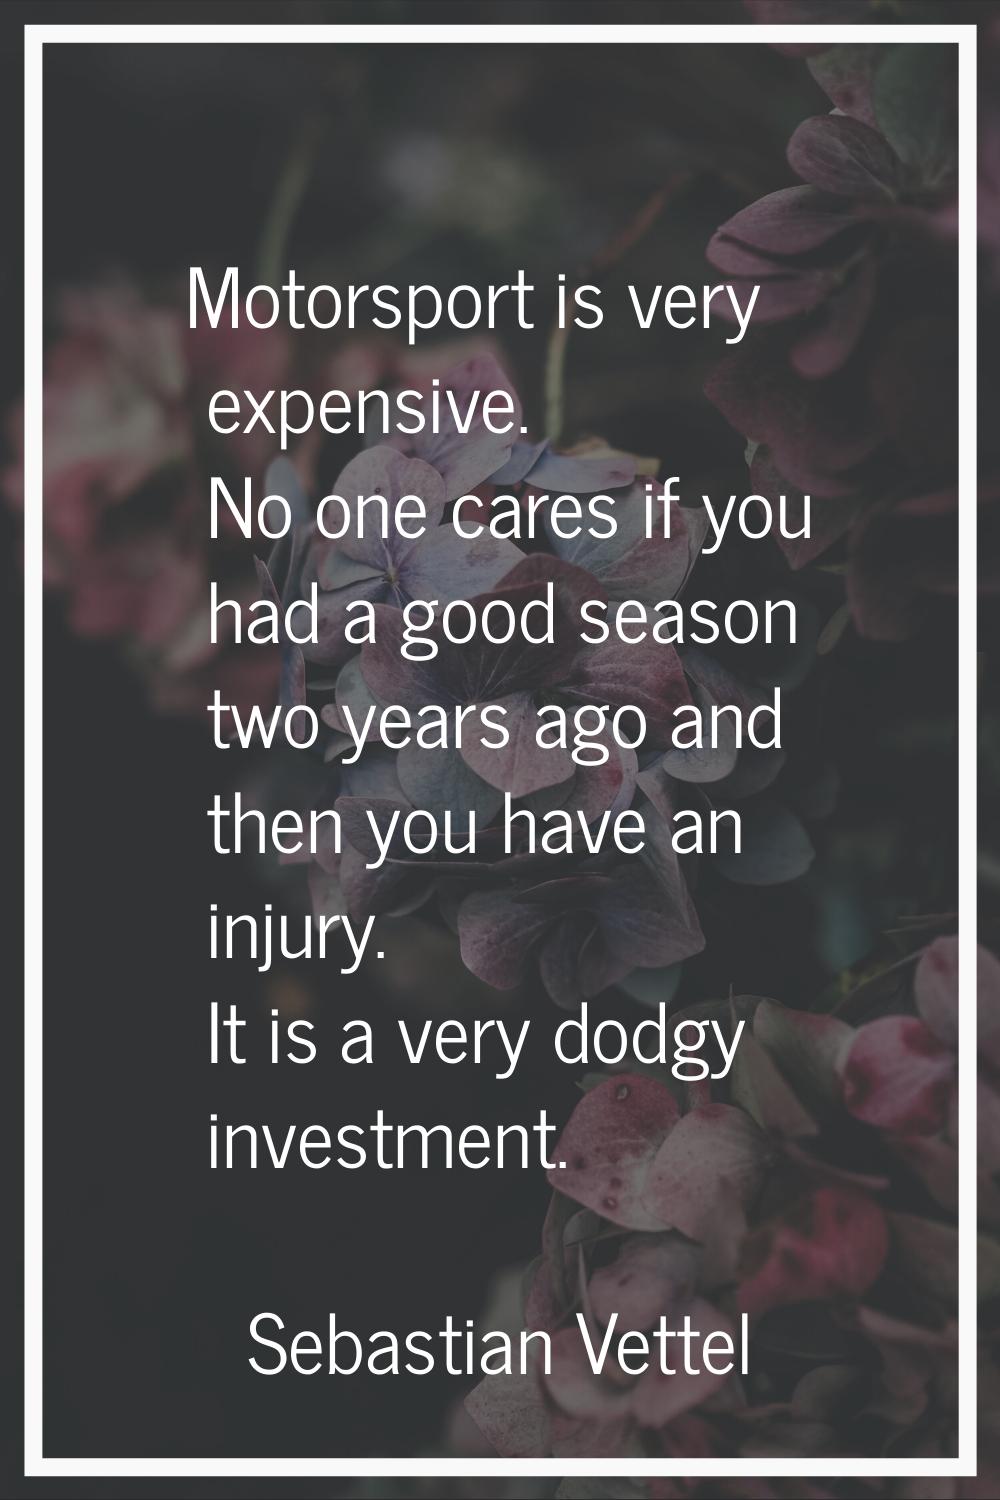 Motorsport is very expensive. No one cares if you had a good season two years ago and then you have